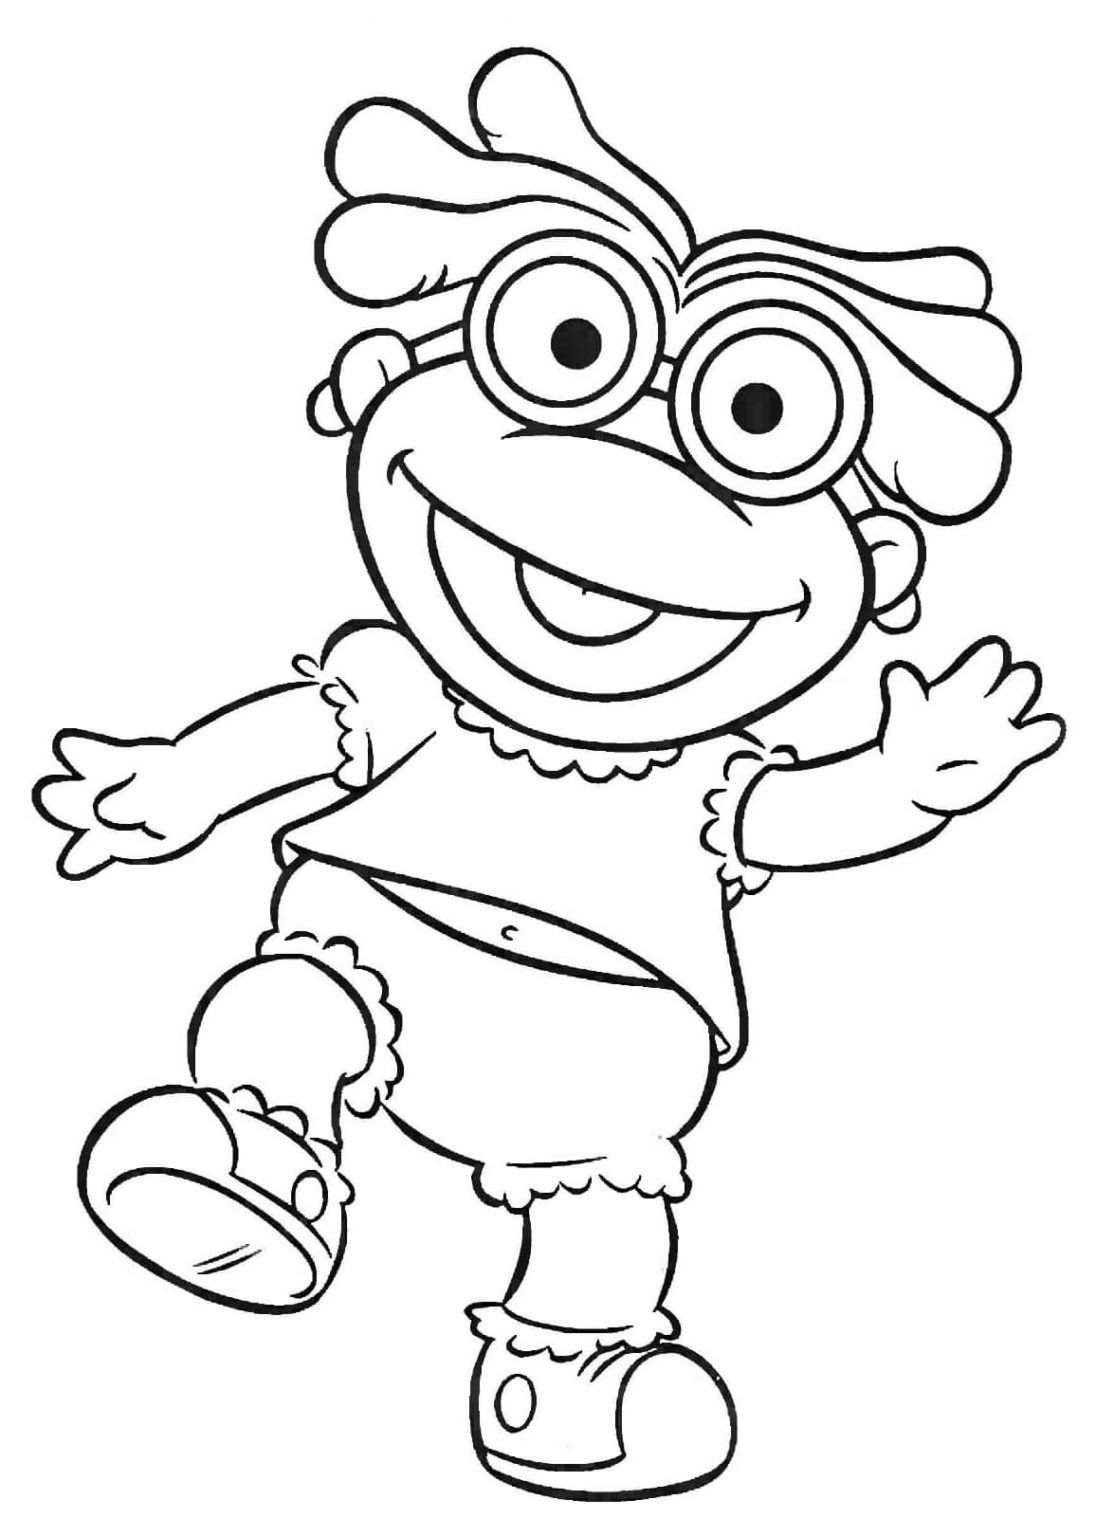 Muppet Babies Coloring Pages | Free Coloring Pages